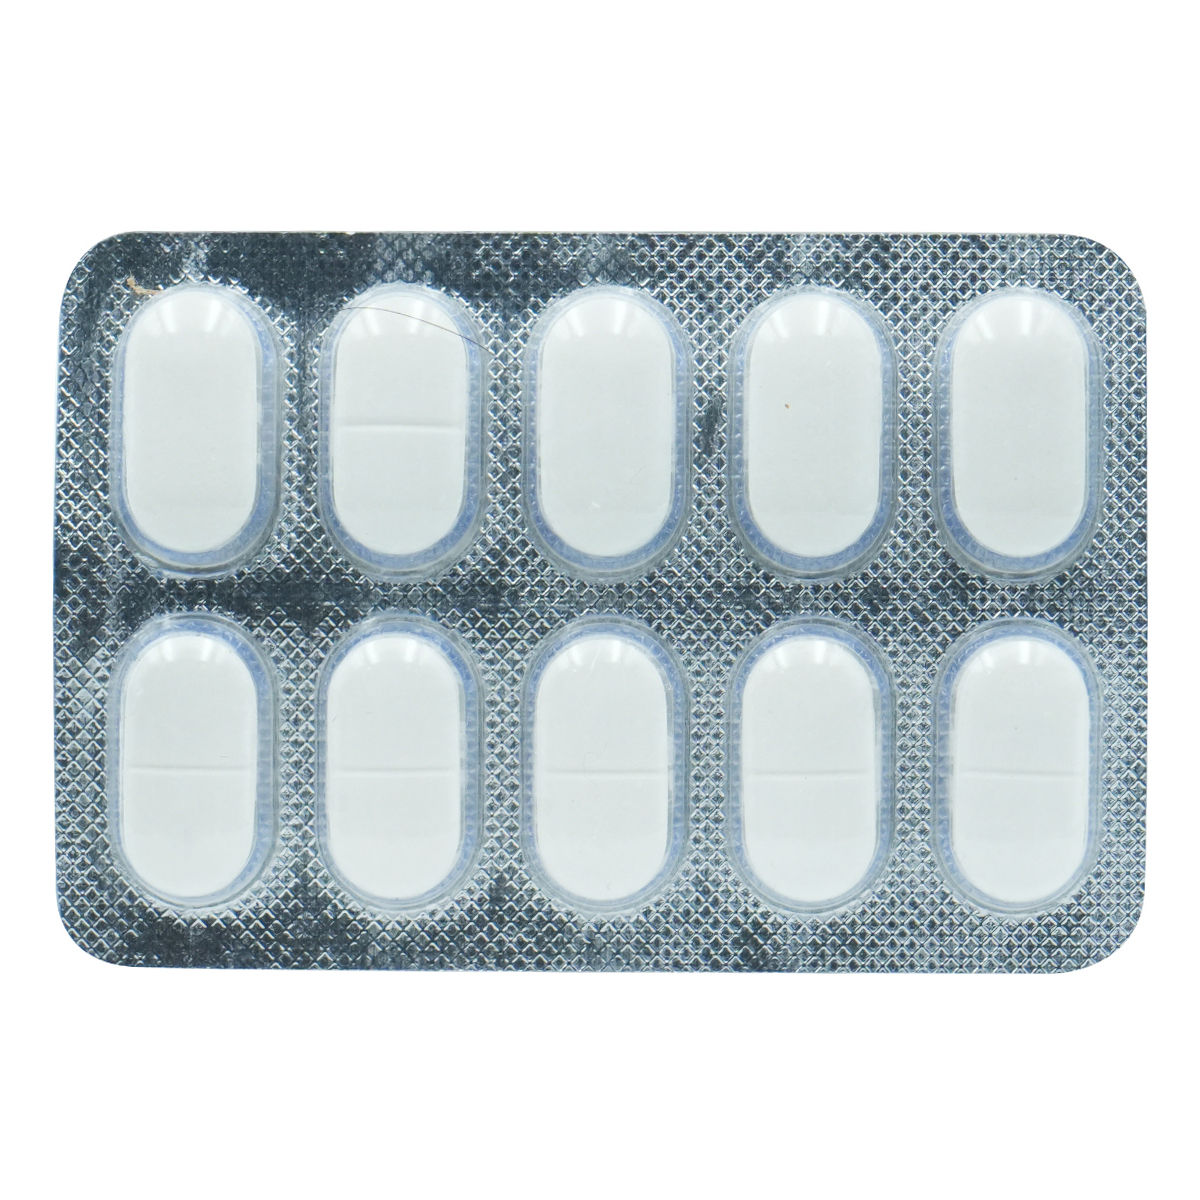 Practozide-M 40 Tablet 10's, Pack of 10 TABLETS